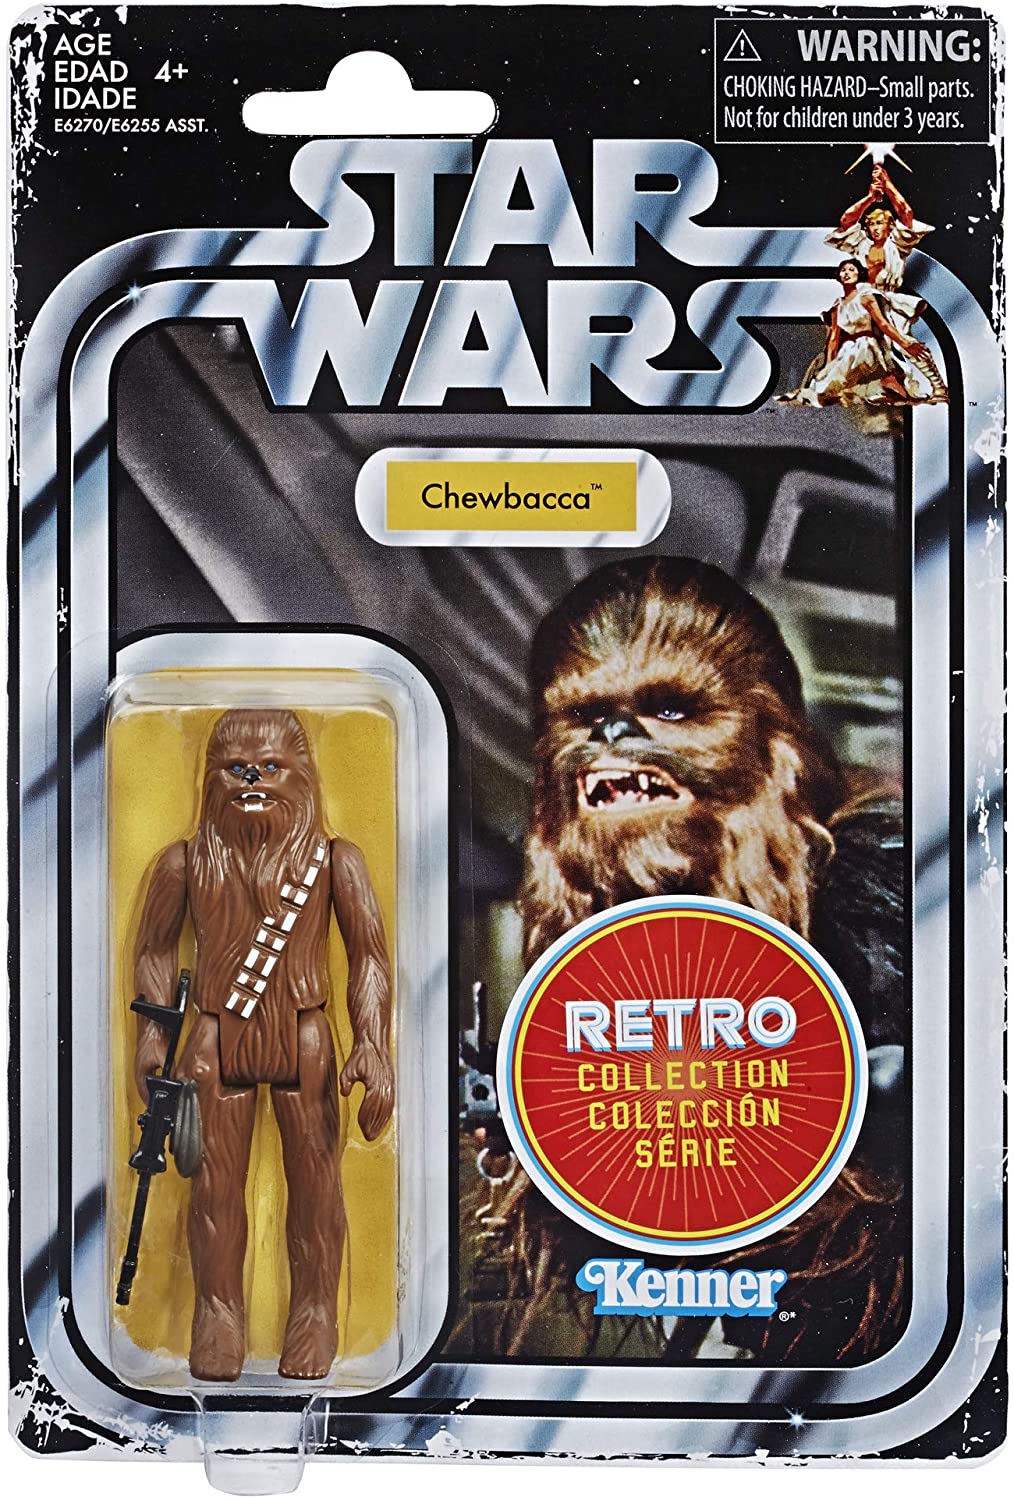 Star Wars Vintage Kenner Loose Complete Chewbacca Action Figure Near Mint